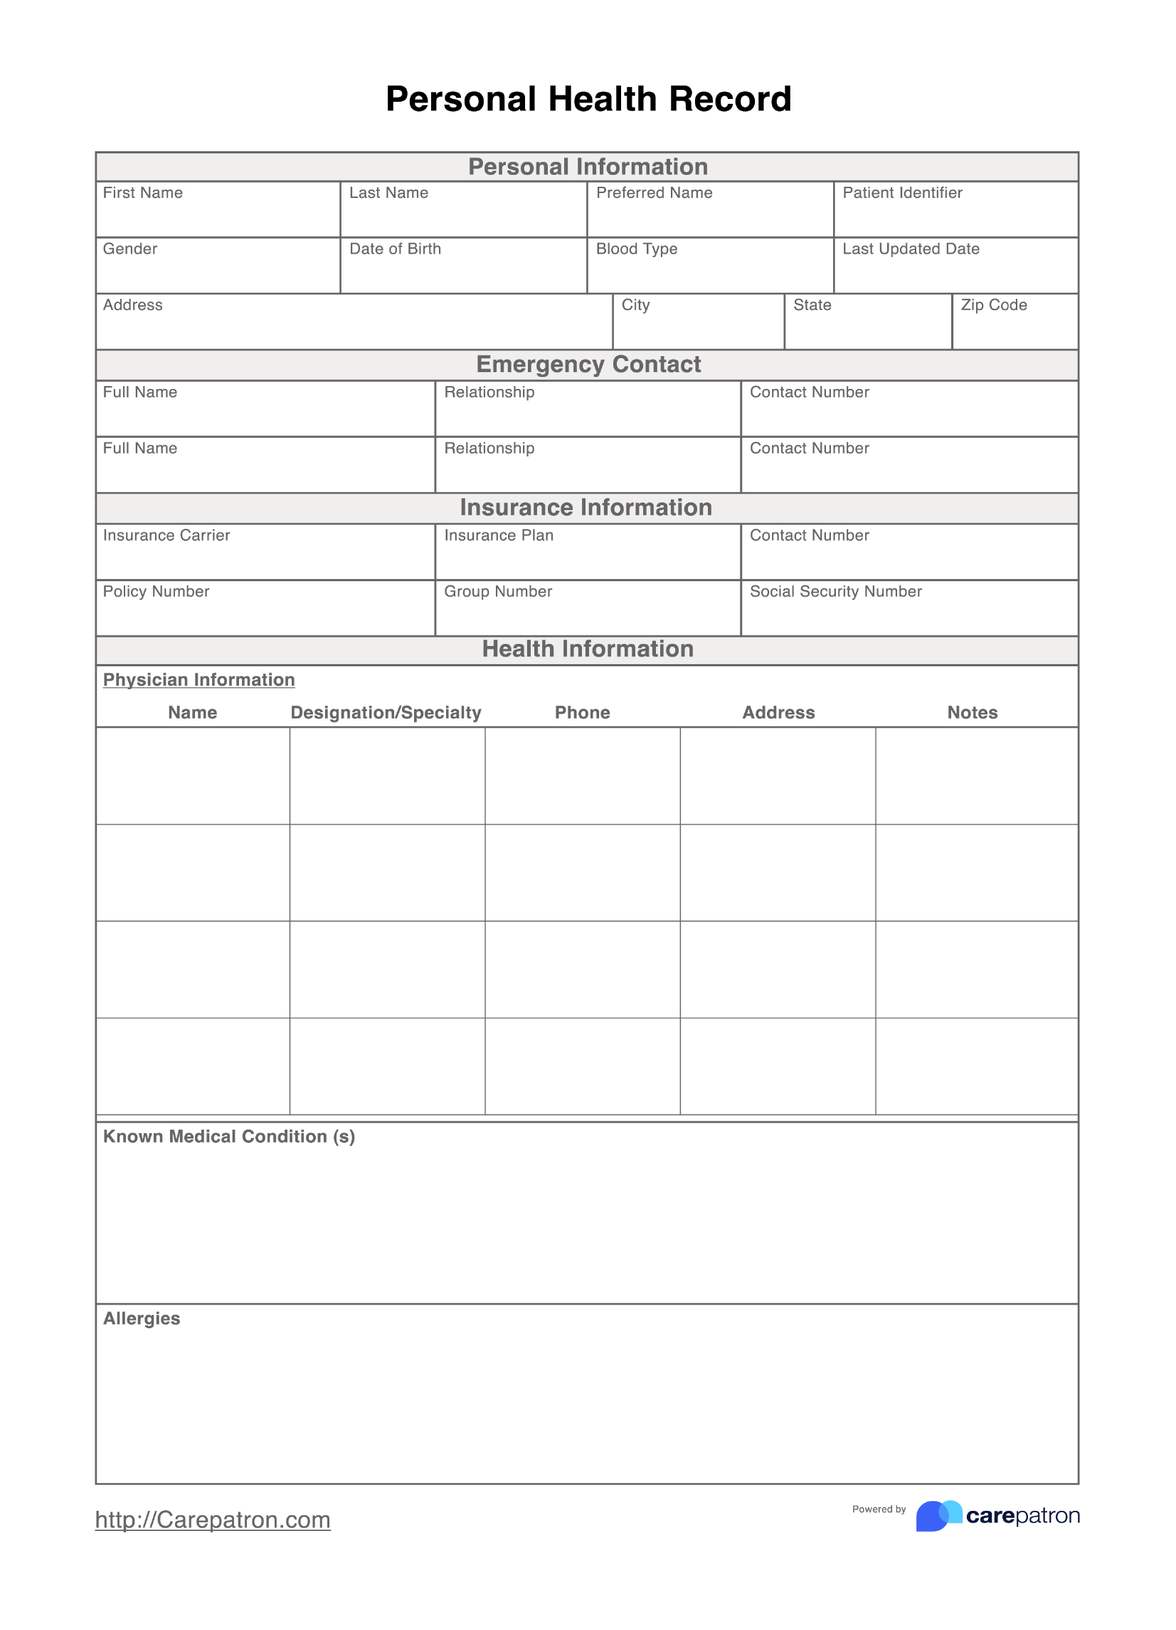 Personal Health Record Template PDF Example